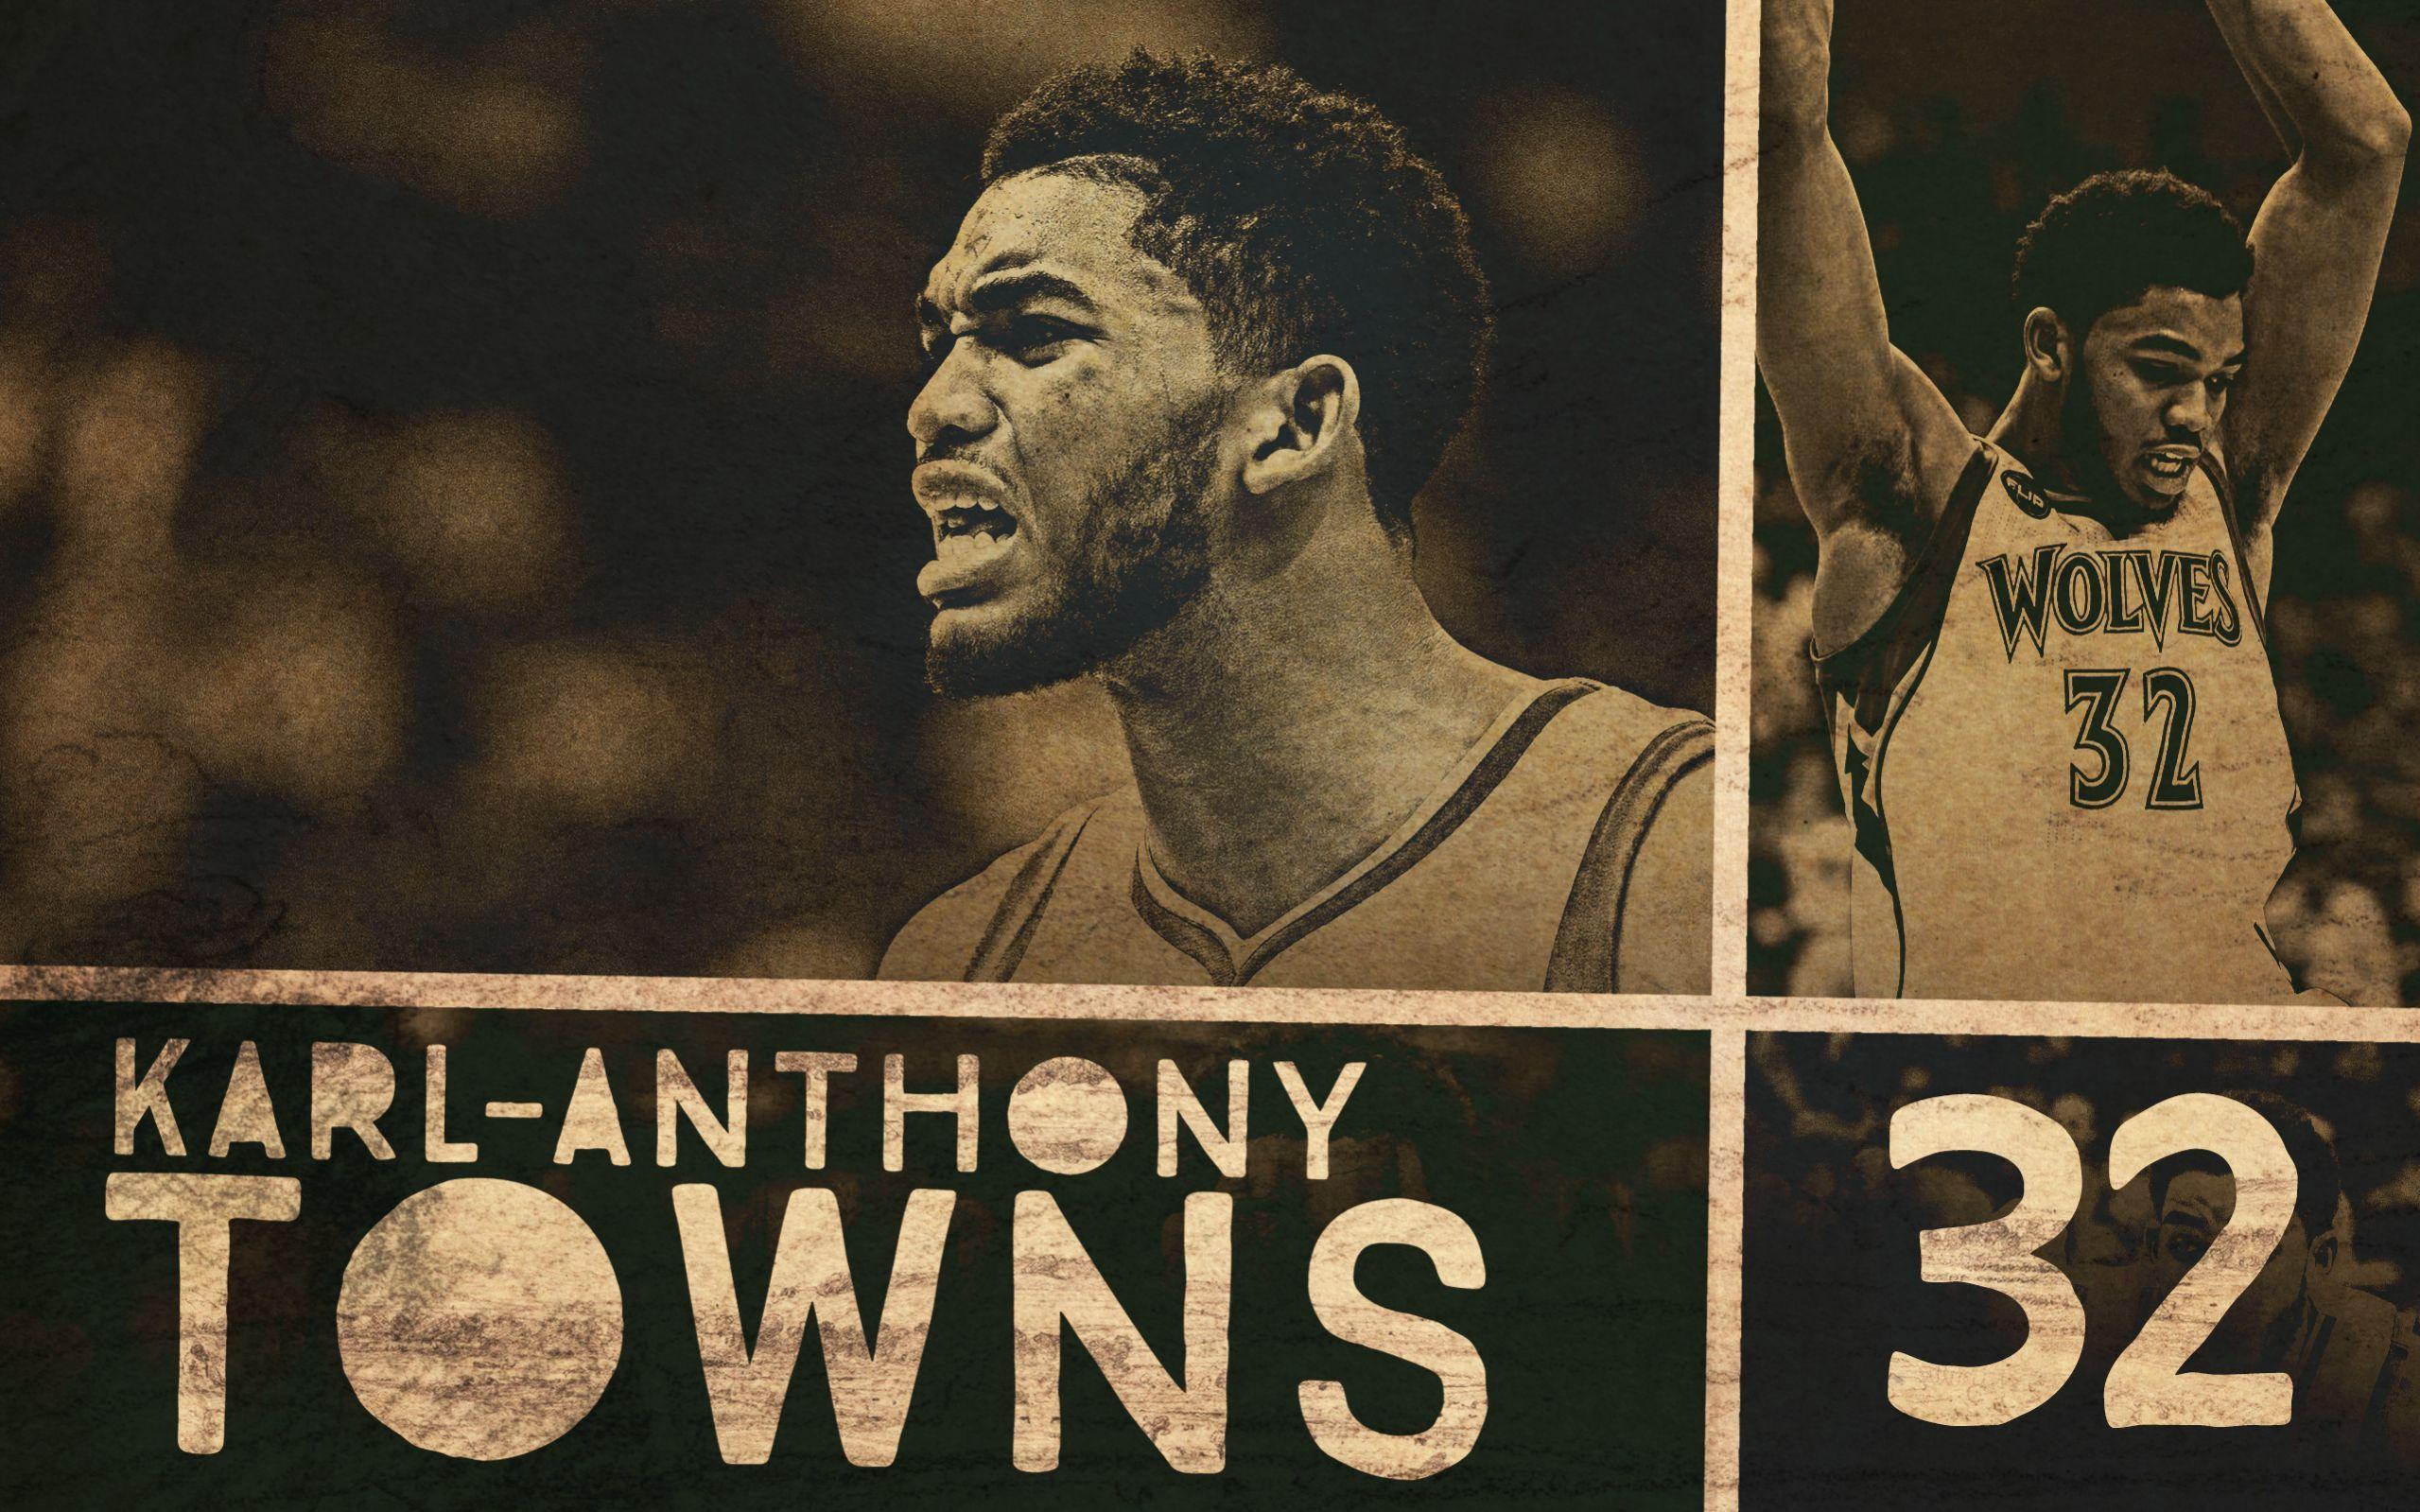 Wallpaper Karl Anthony Towns